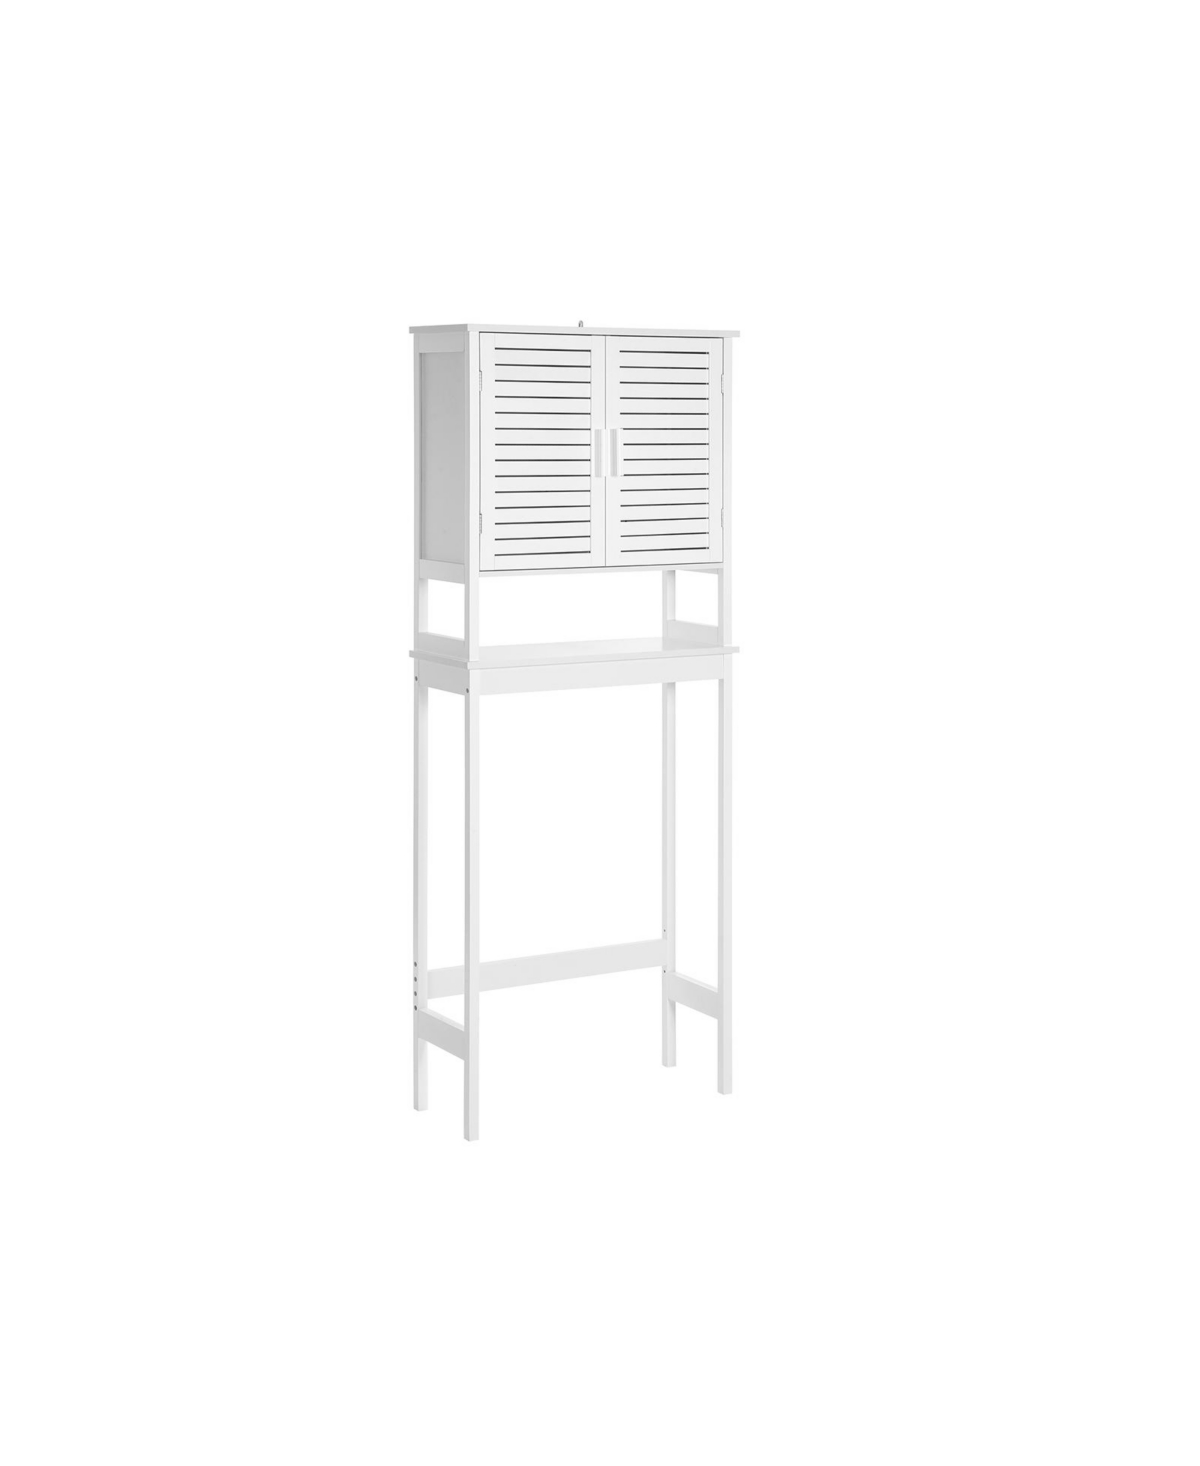 Over-the-toilet Storage, Bathroom Cabinet With Adjustable Inside Shelf - White